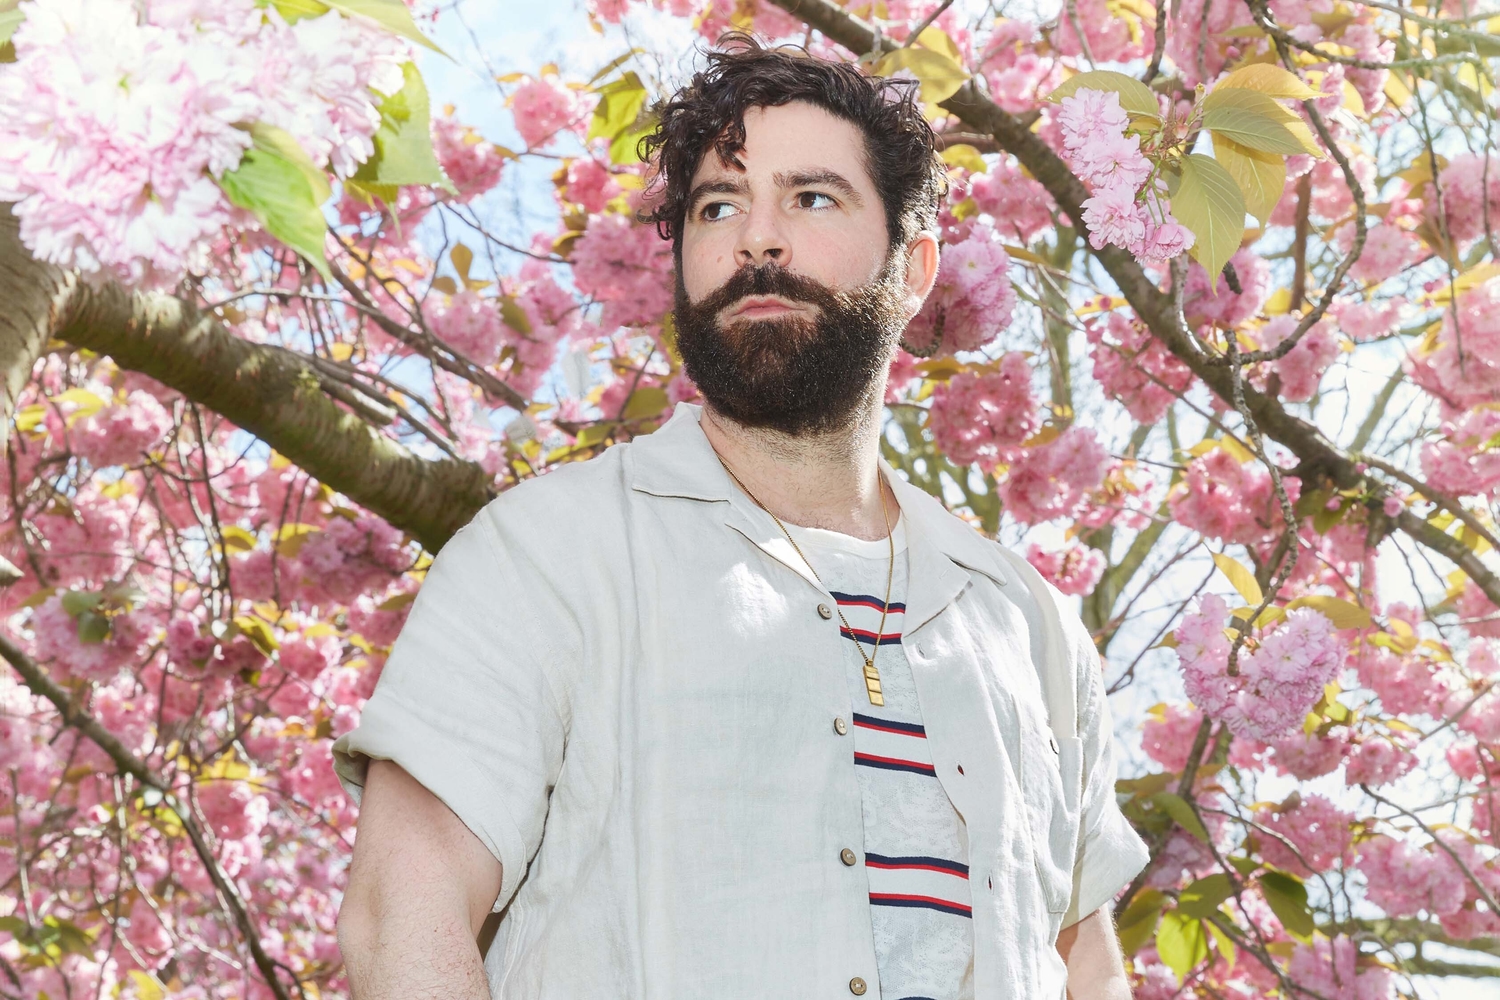 Yannis Philippakis on working with Tony Allen, their collaborative project Yannis & The Yaw, and new EP 'Lagos, Paris, London'